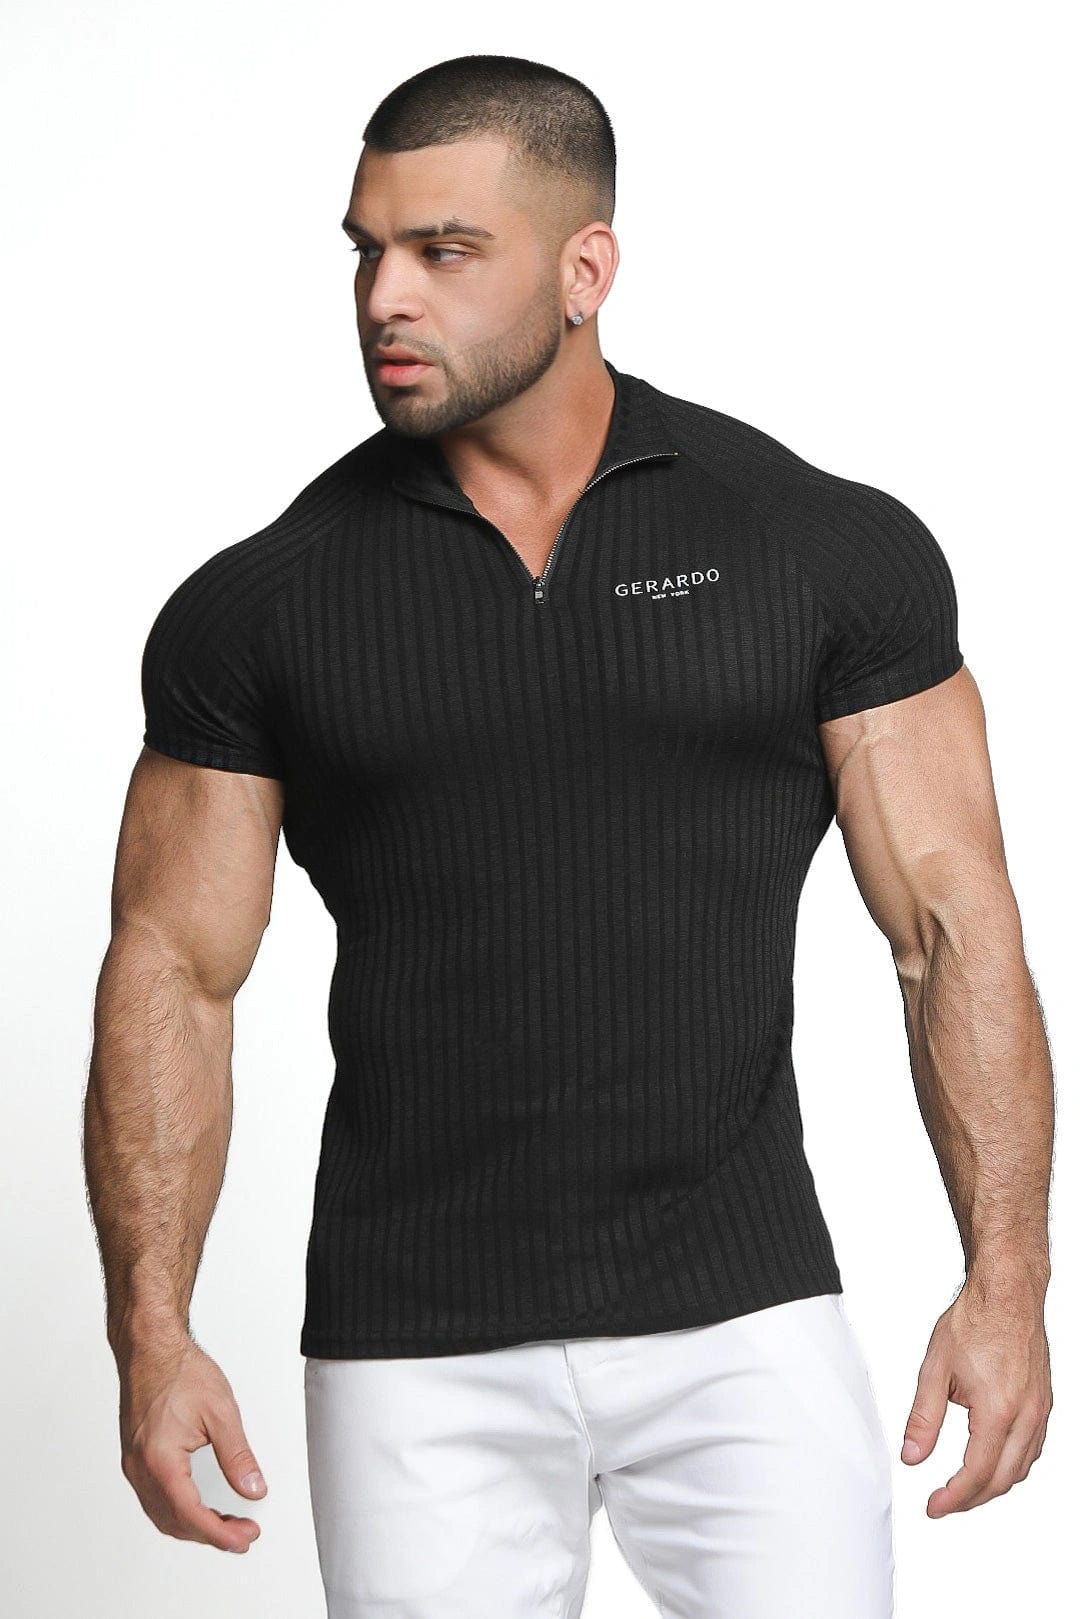 Mens Athletic Fit Polo Shirt - Gerardo Collection